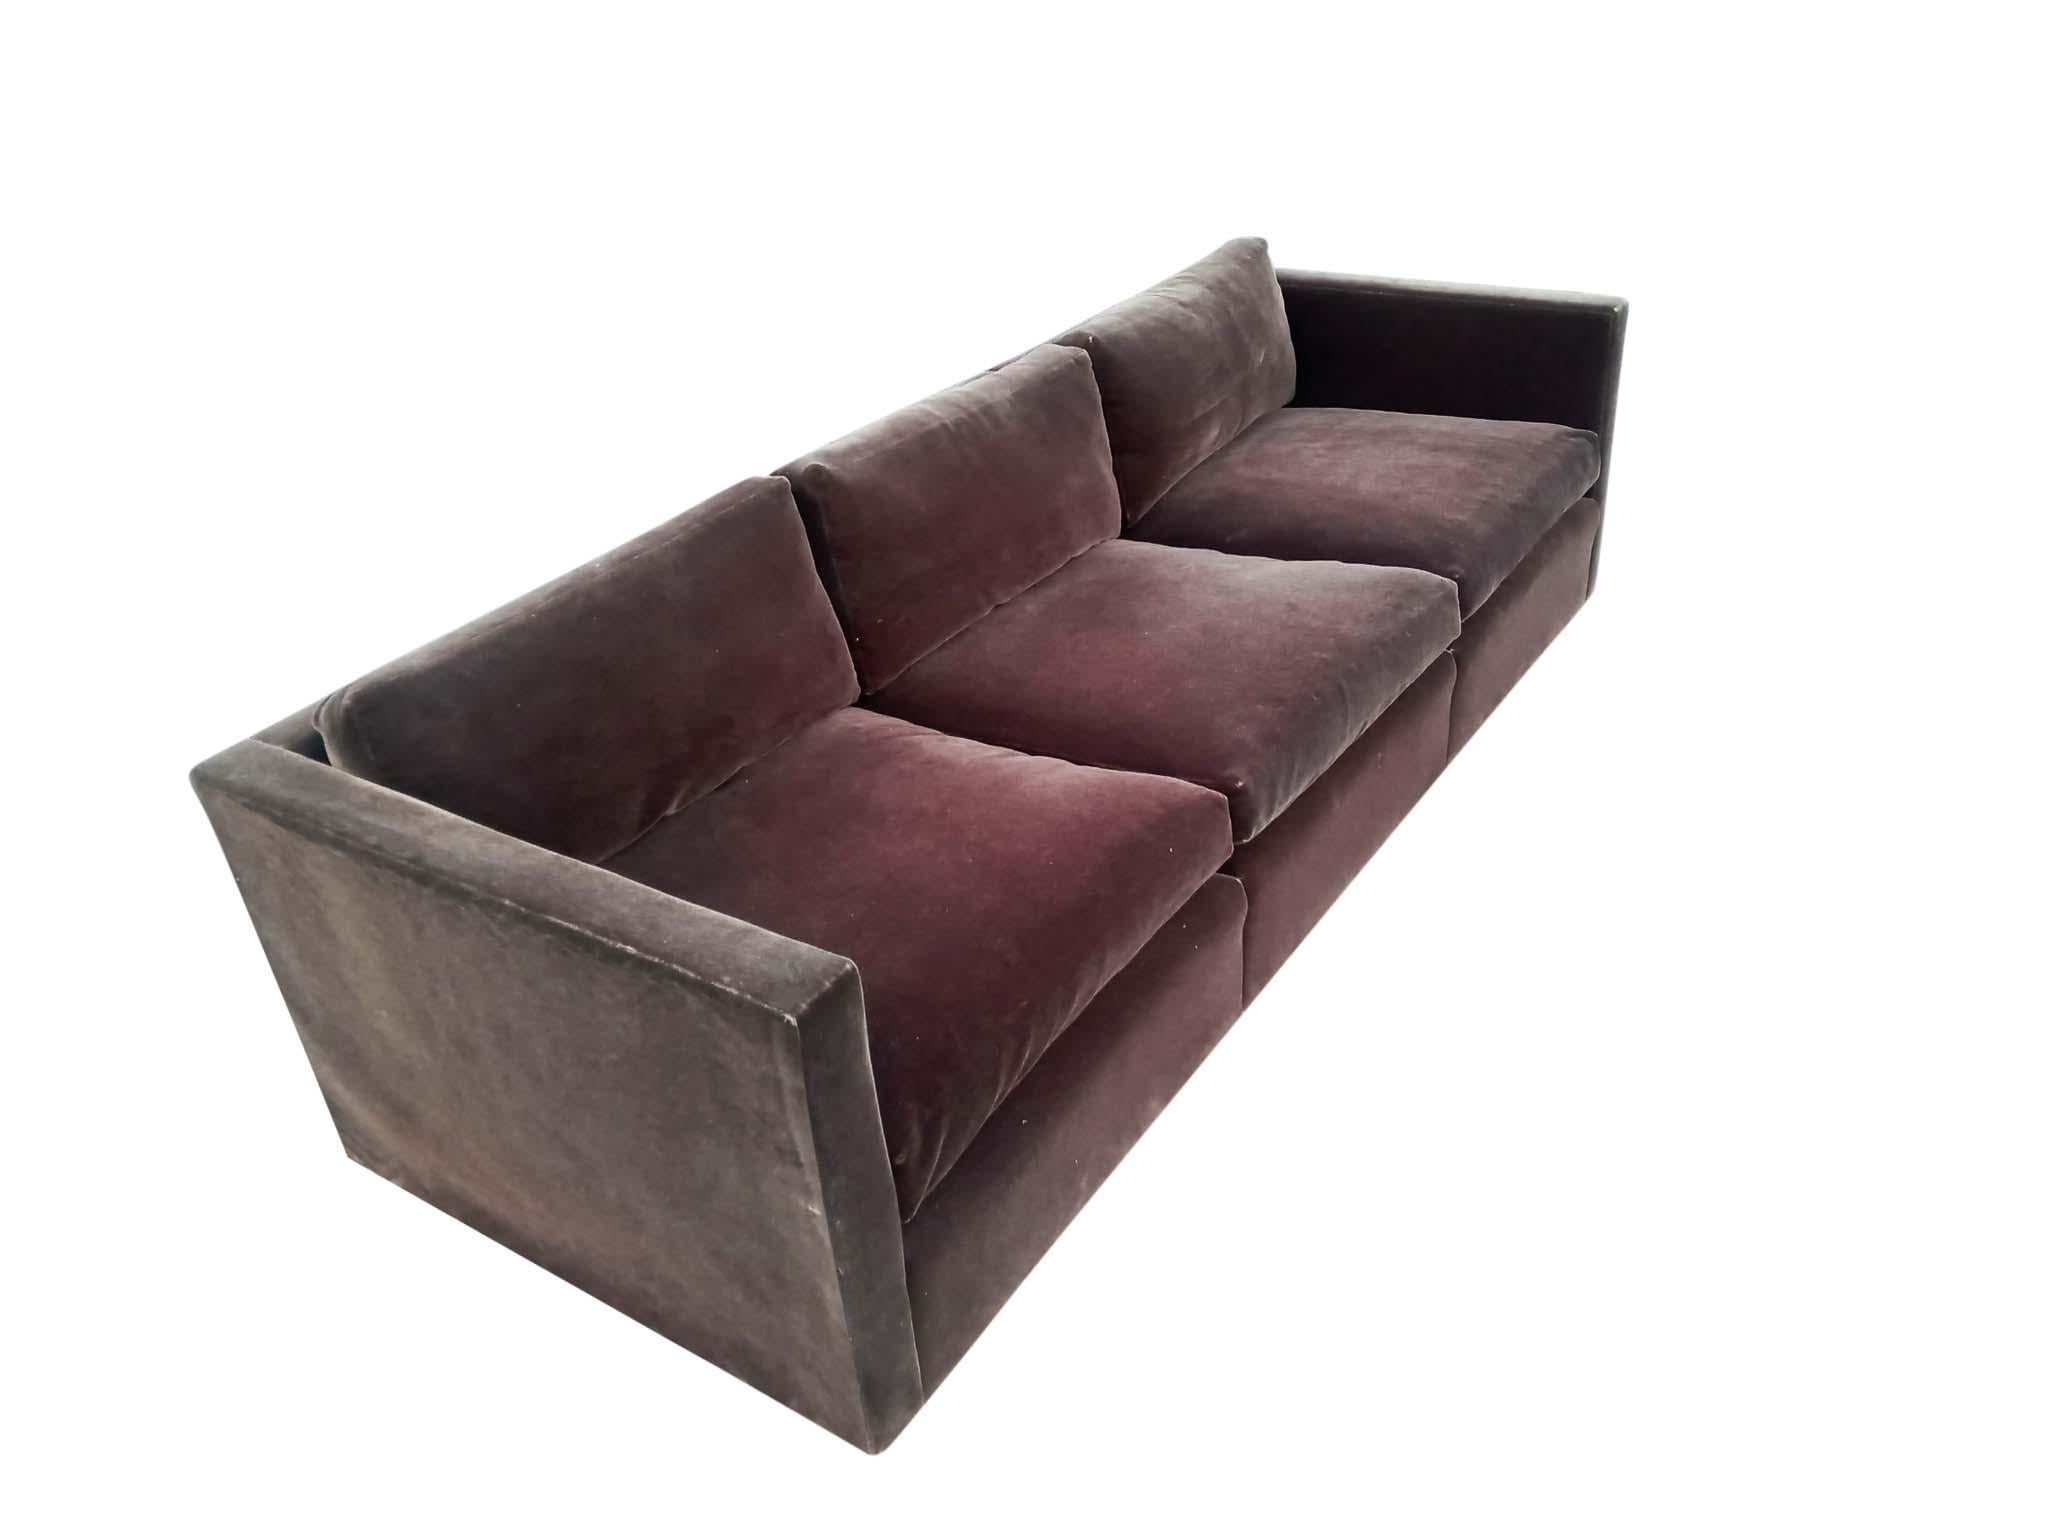 Charles Pfisters 1971 sofa, designed for Knoll, is a classic and minimalist design which works in any interior. The small back legs are set back to impart a 